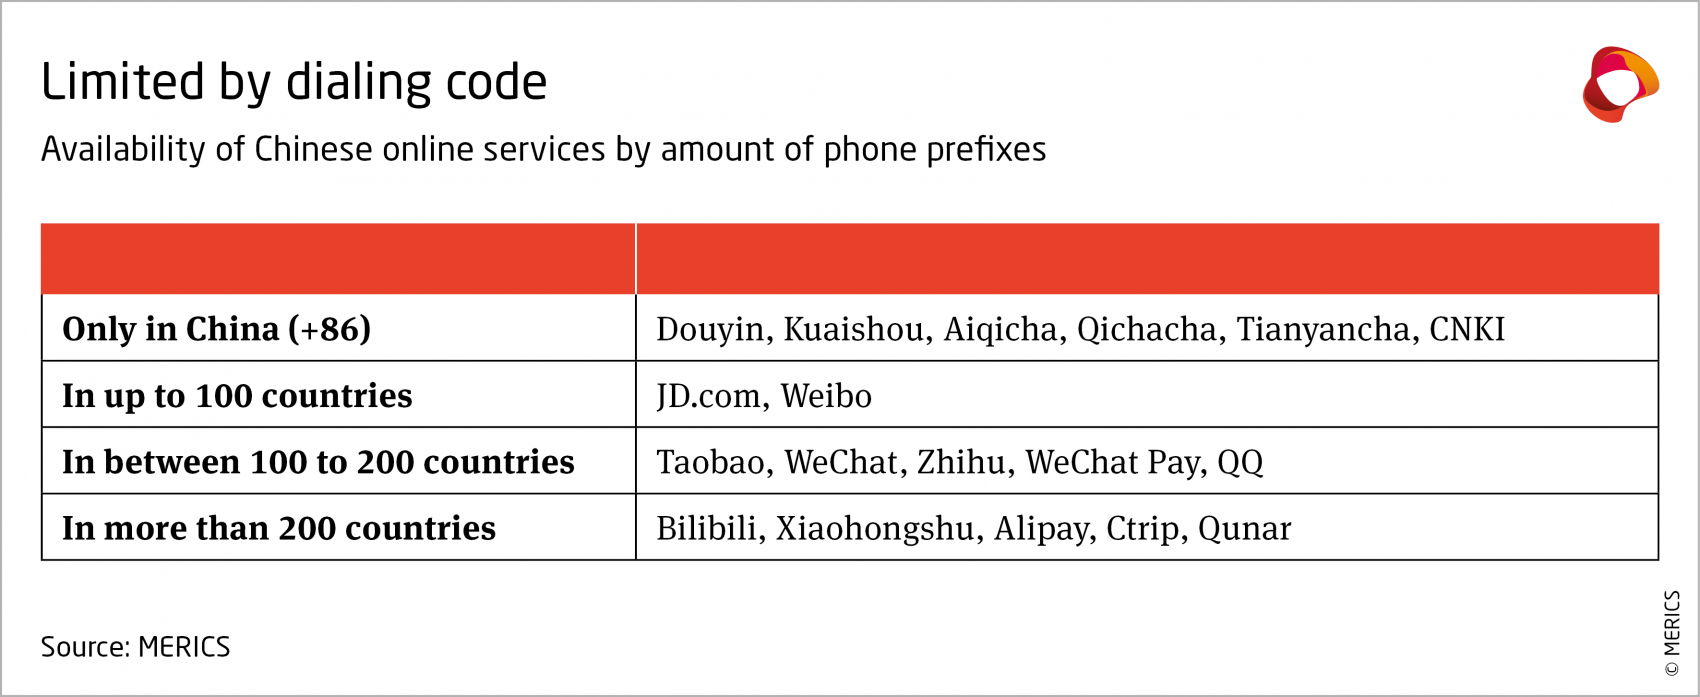 merics-Availability-of-Chinese-online-services-by-amount-of-phone-prefixes.png